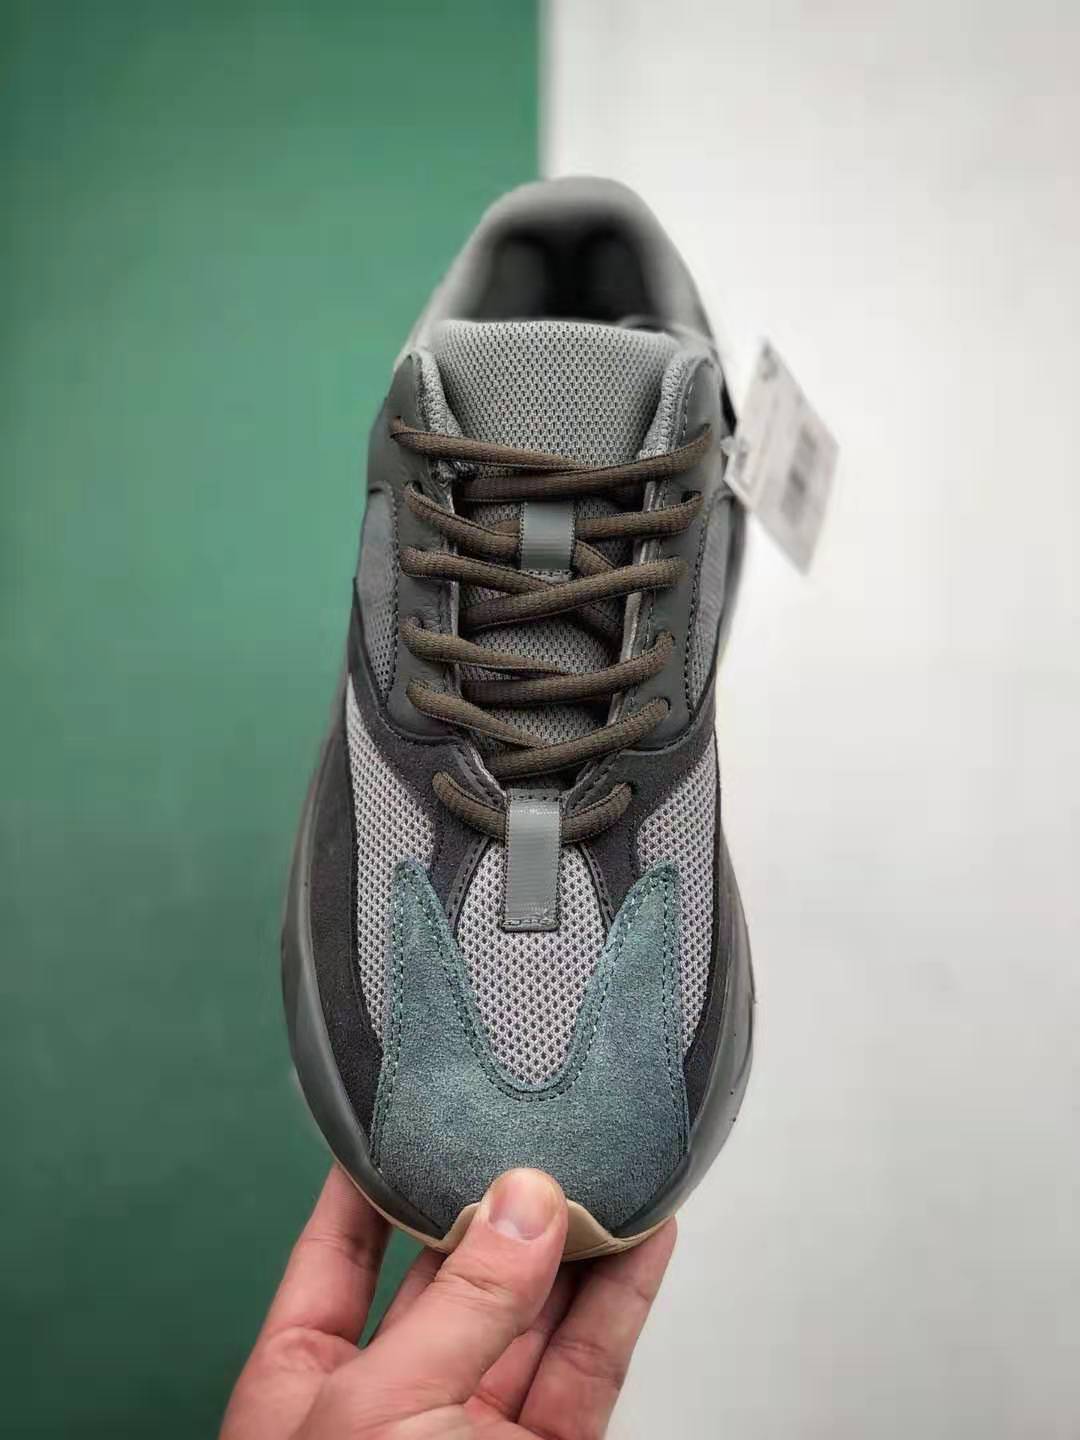 Adidas Yeezy Boost 700 Teal Blue FW2499 - Stylish and Comfortable Footwear